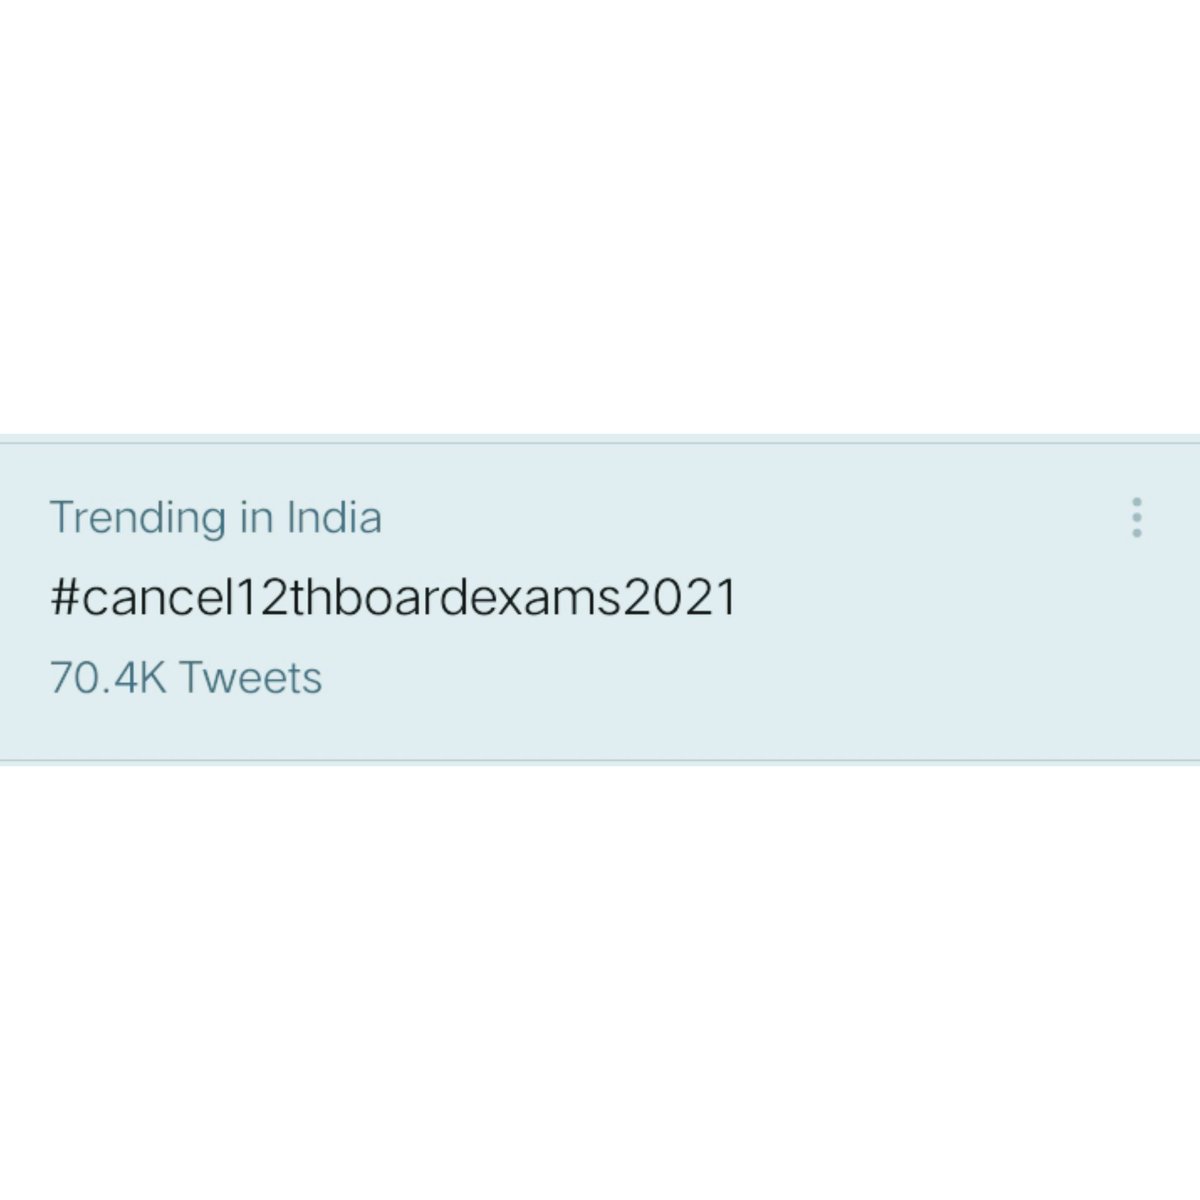 #cancel12thboardexams2021 
Showing students power. 
Cancel 12th board exams. 
#StudentLivesMatter #StudentsBoycottOfflineExams